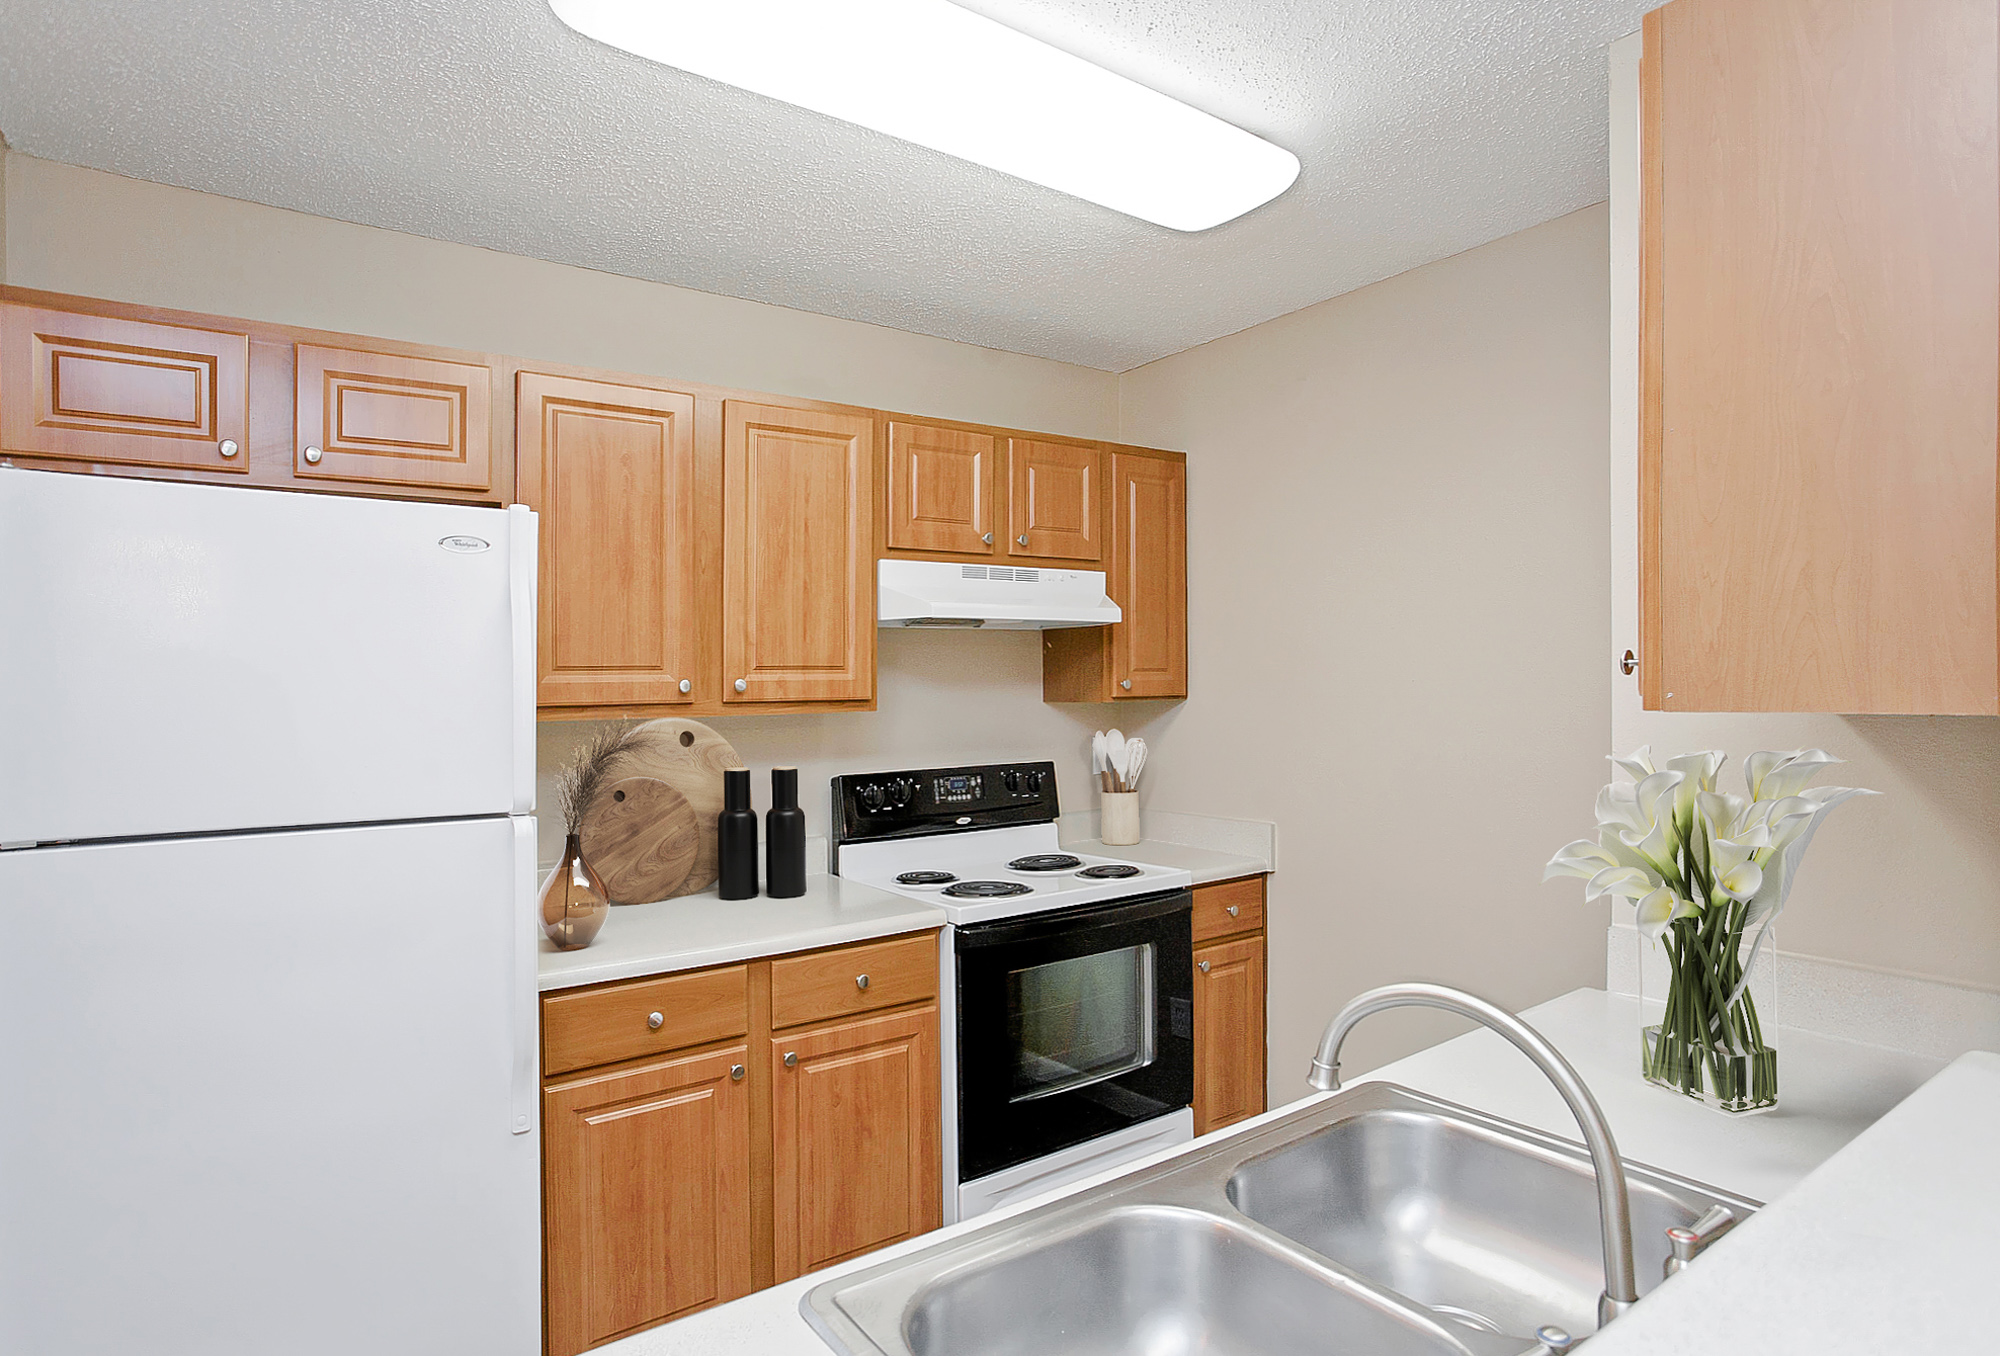 The kitchen of an apartment at The Arbors of Wells Branch in Austin, TX.